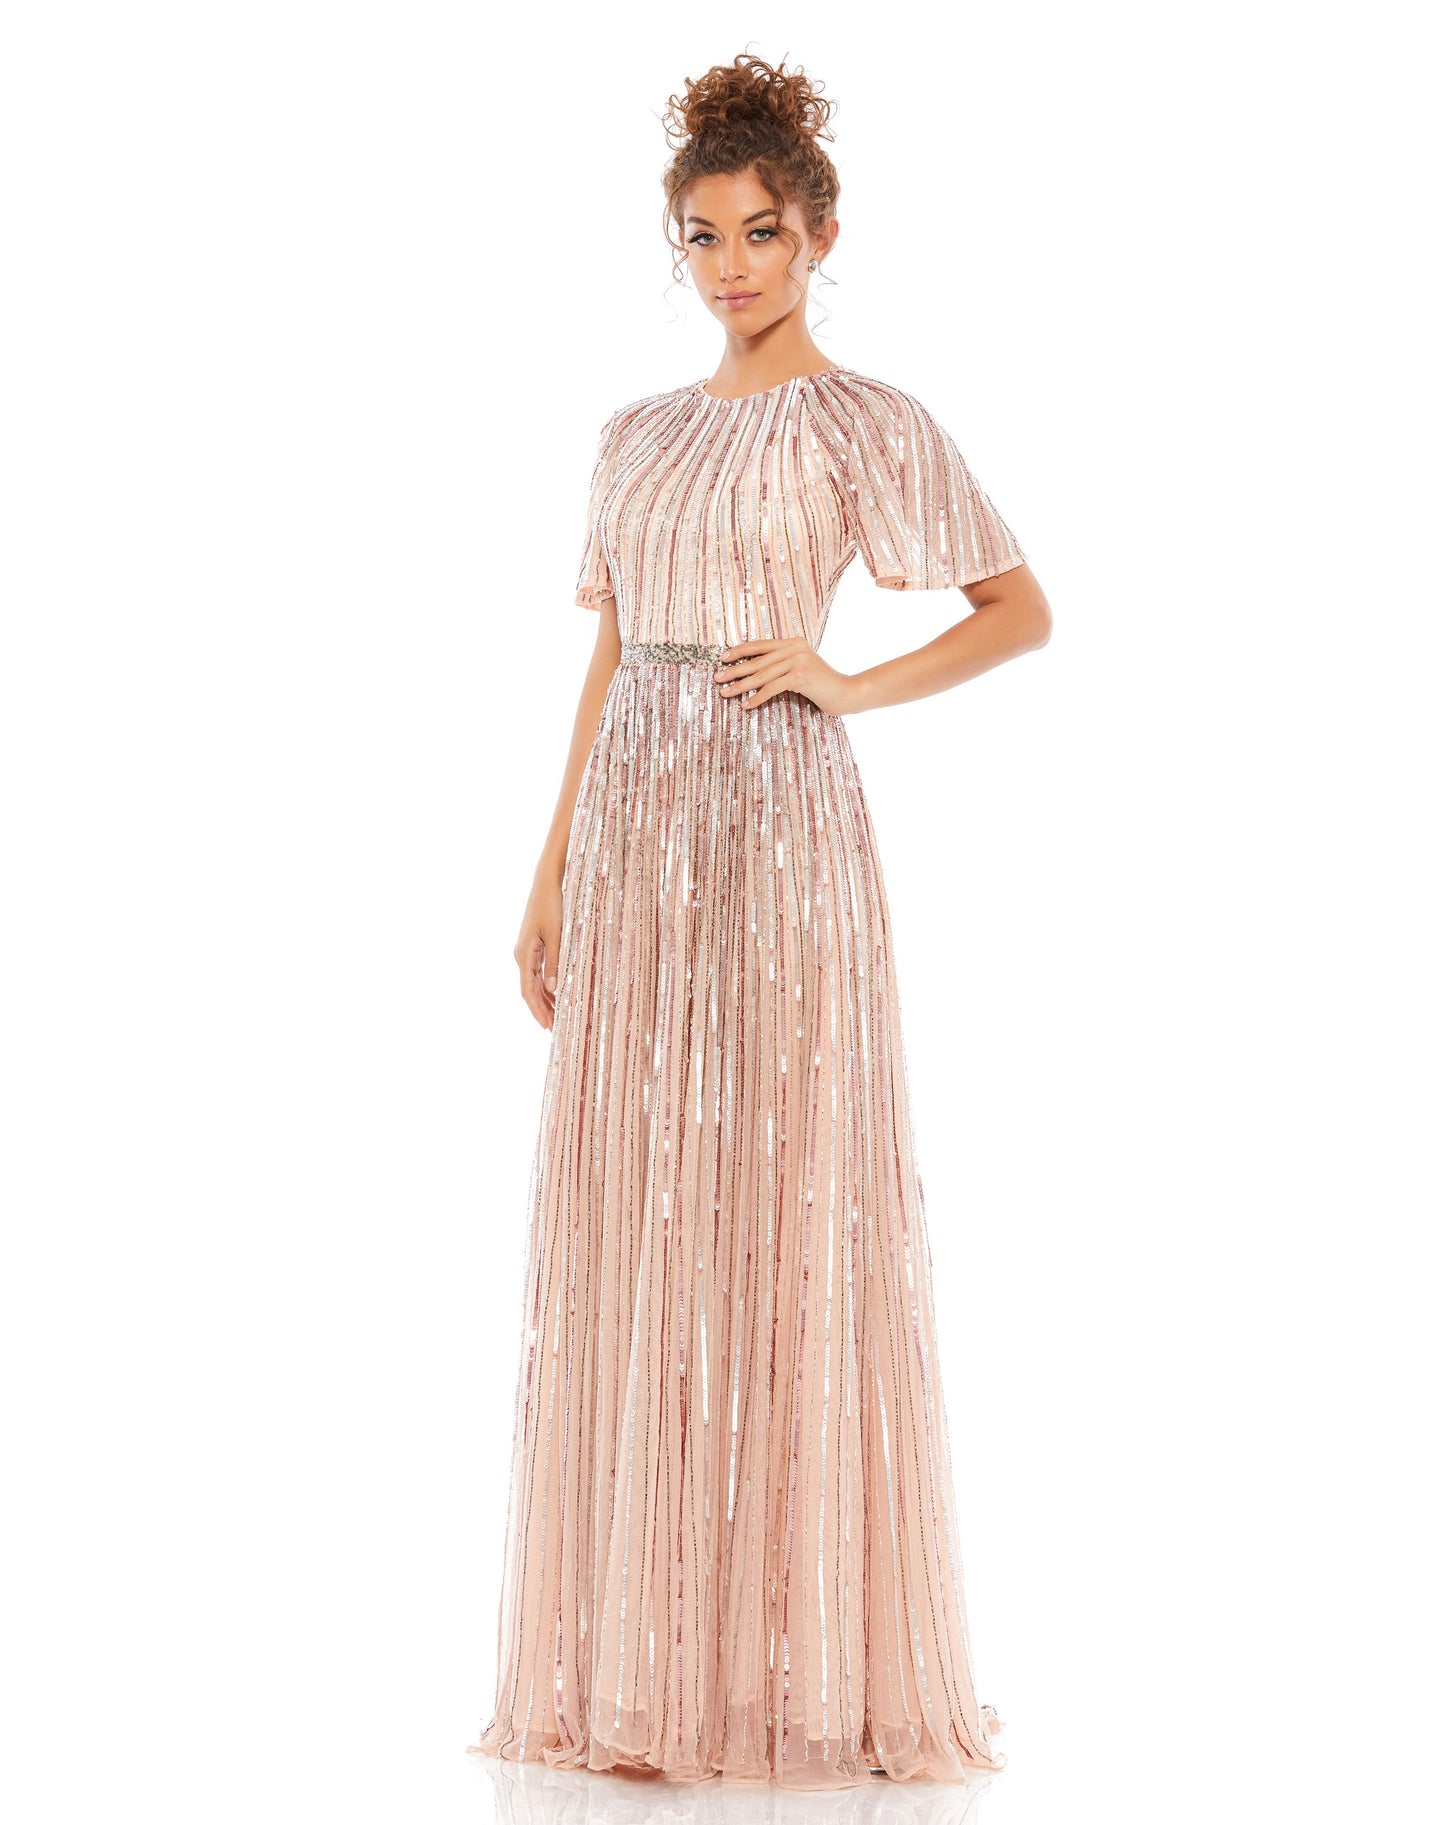 Beautiful hand-embellished ombré sequin gown complete with bell sleeves, a rhinestone belt, and a flowing train. Mac Duggal Fully Lined Back Zipper 100% Polyester Bell Sleeve Full Length Style #4913